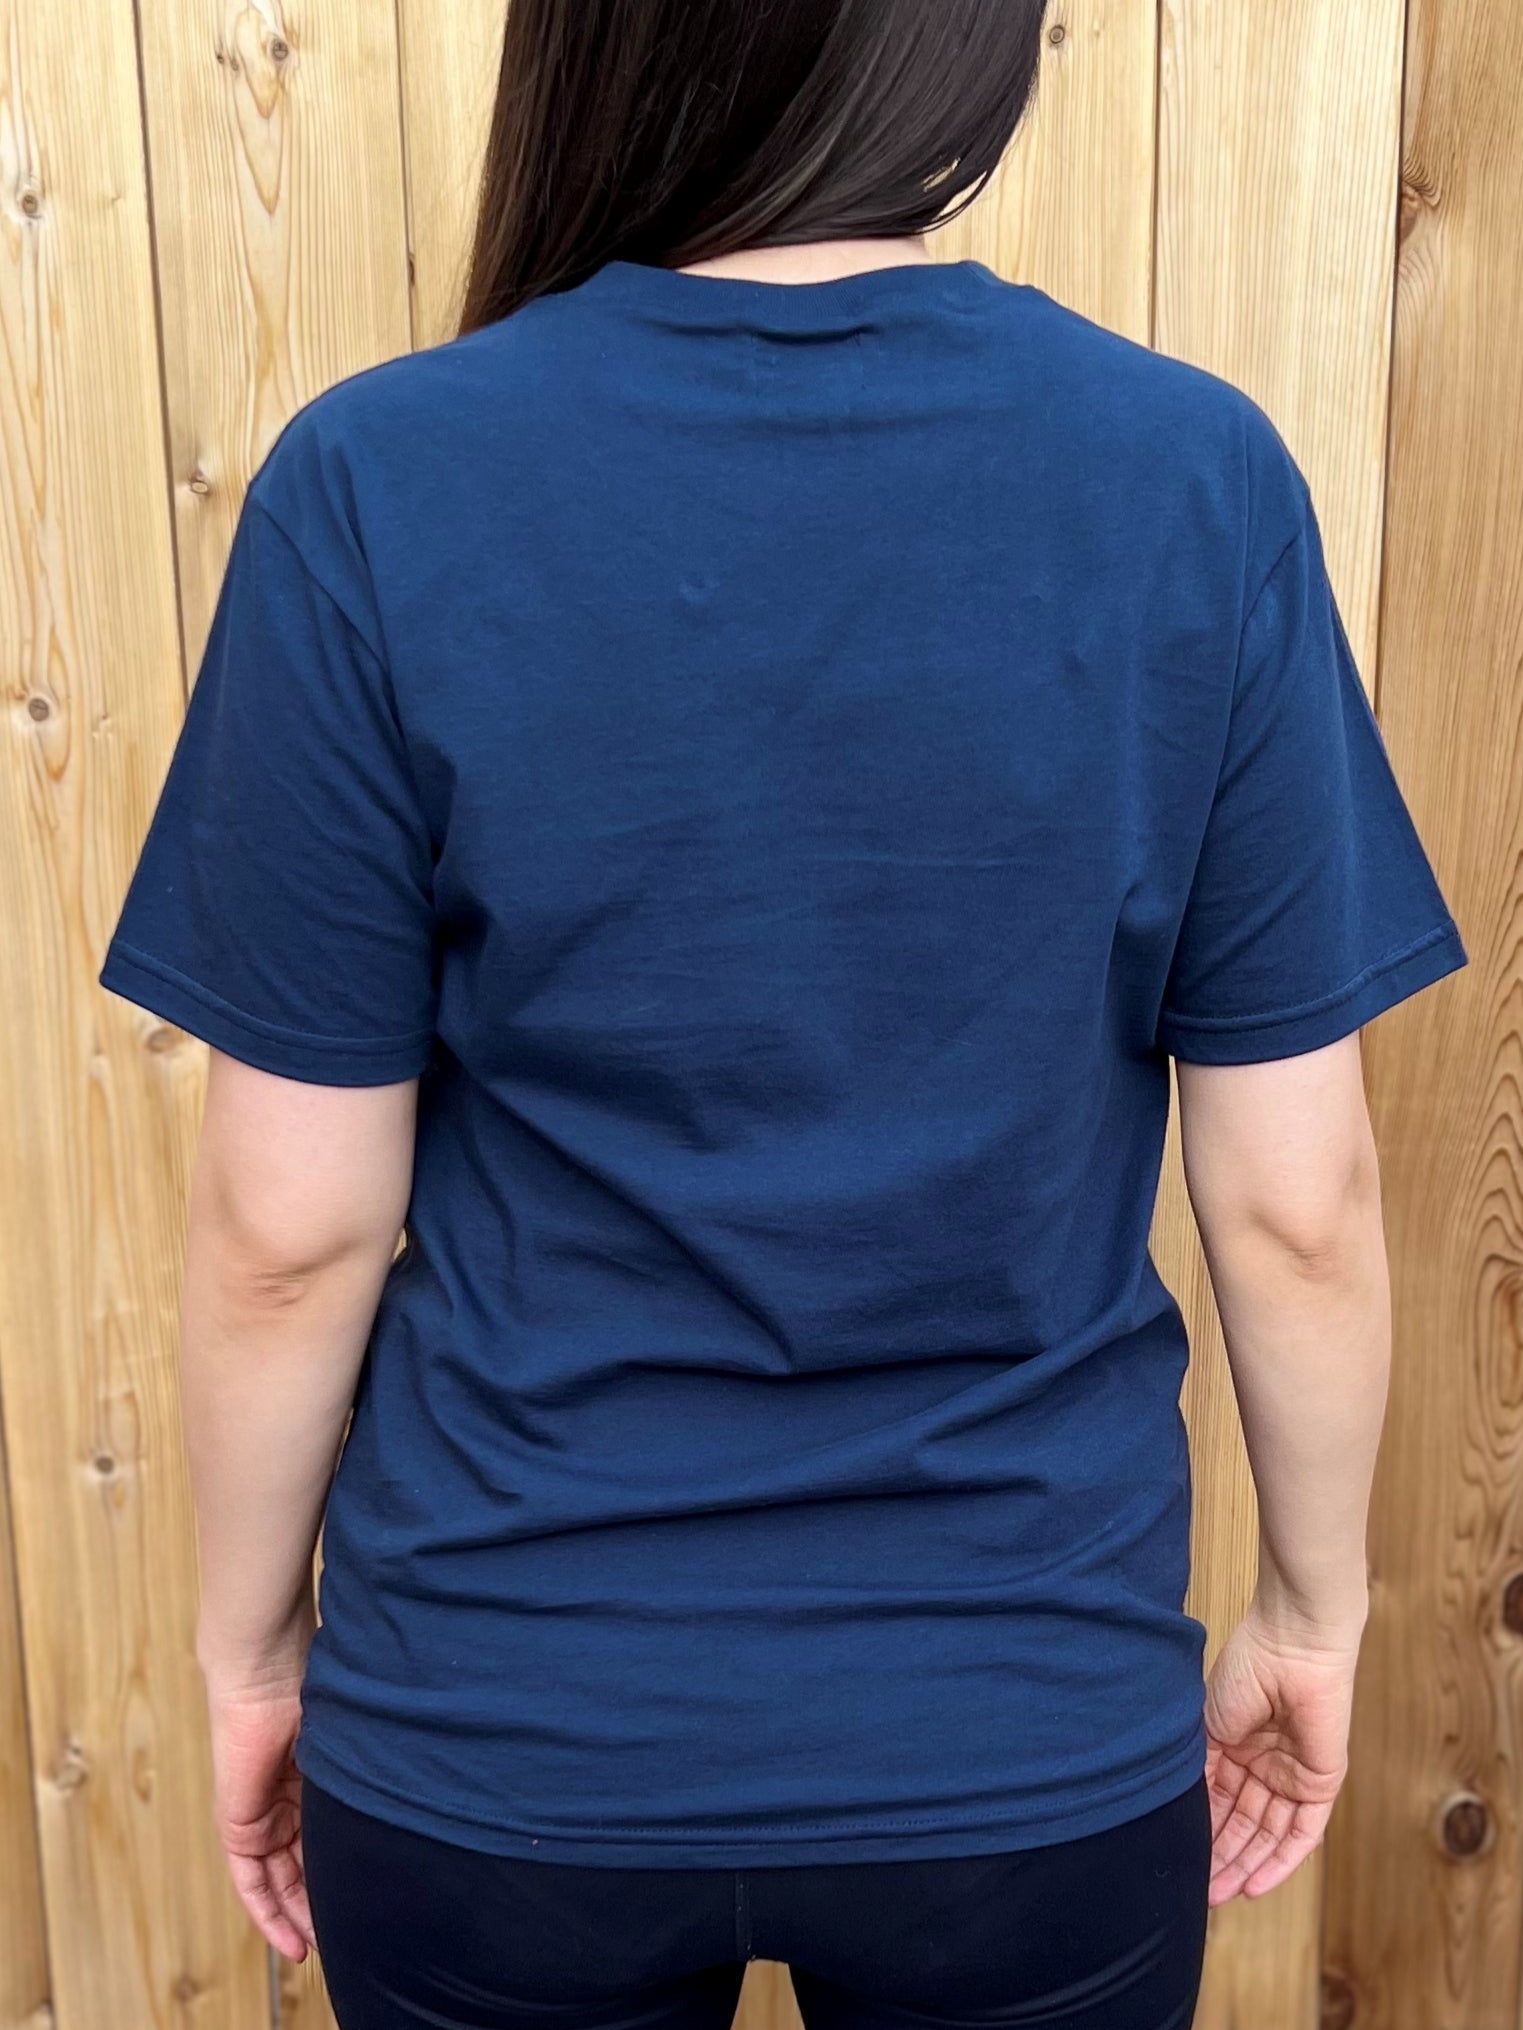 The back of a navy t-shirt worn by a woman.